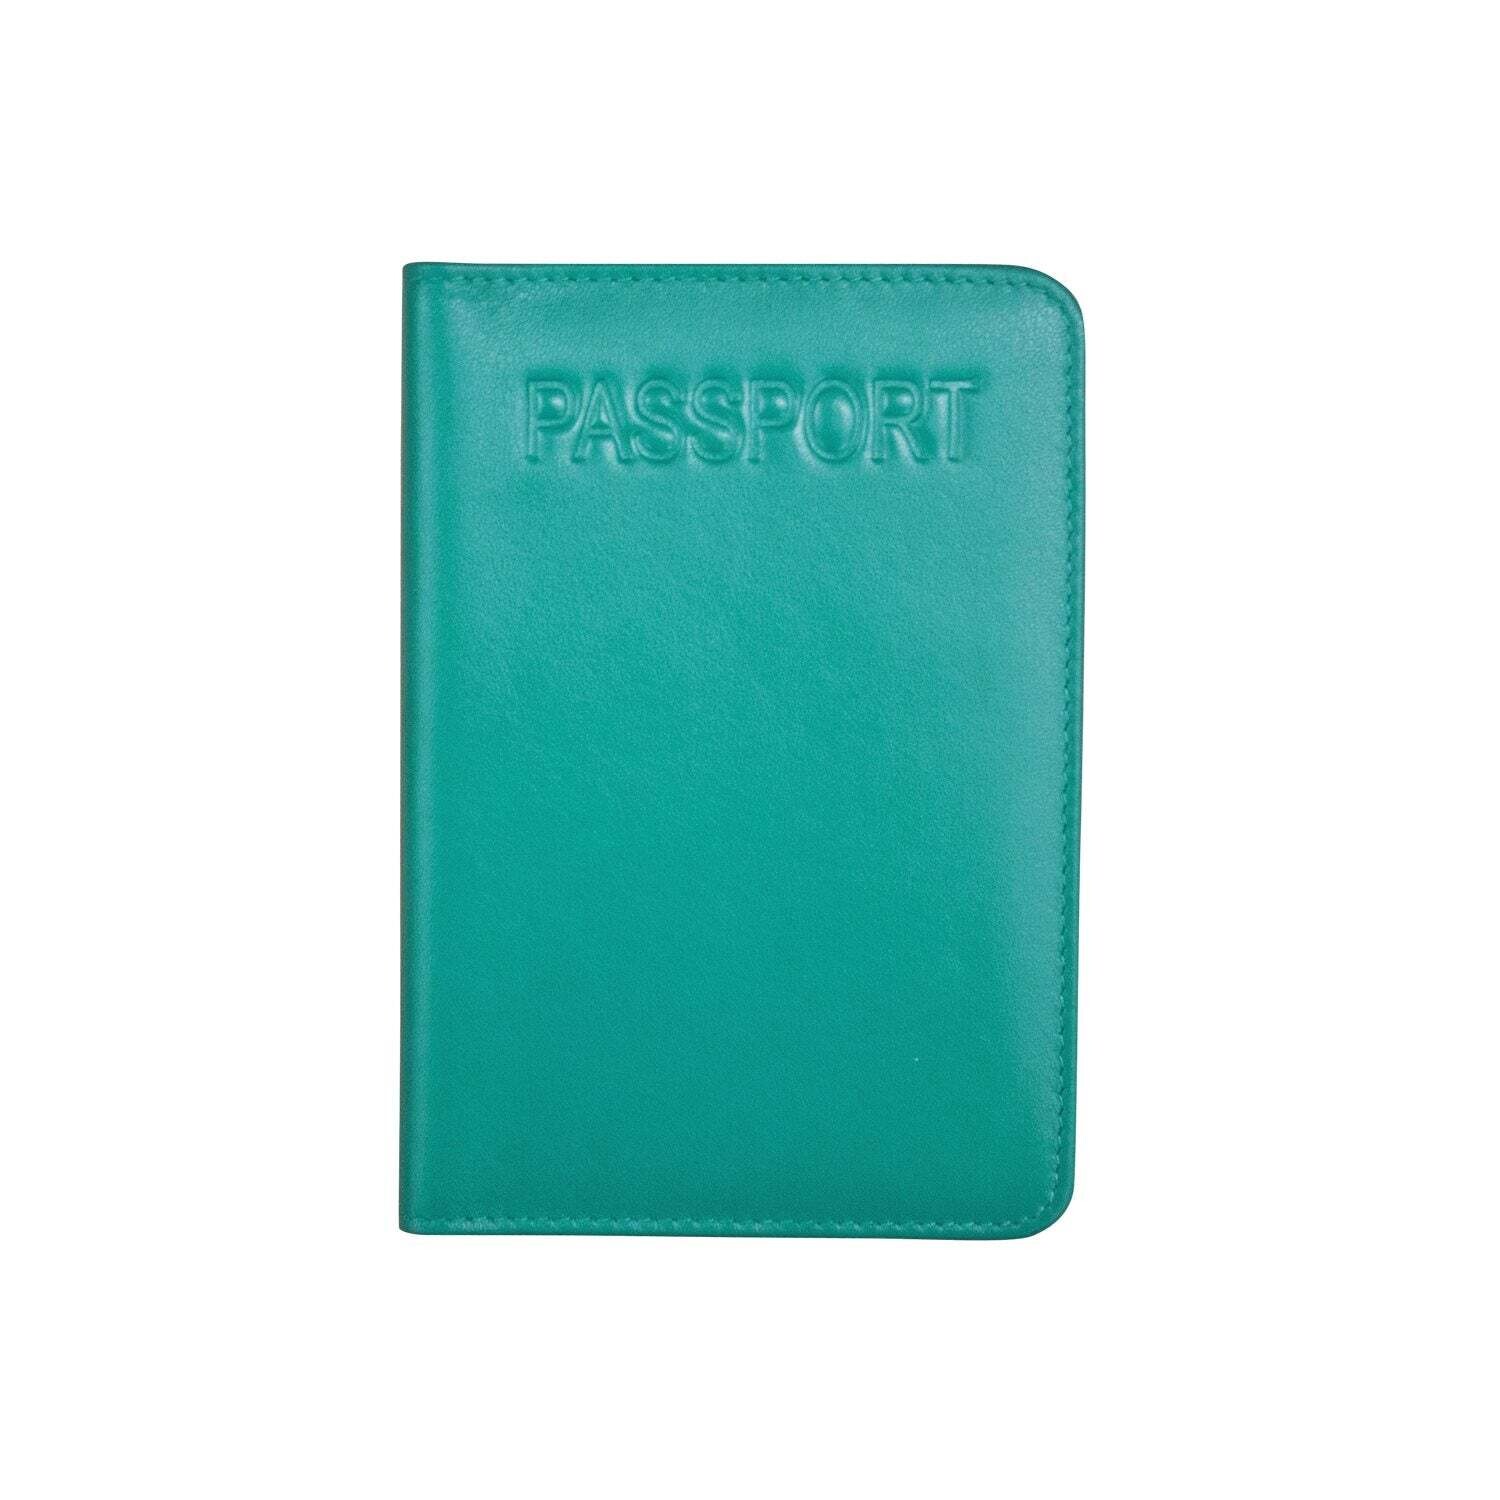 Passport Cover Teal